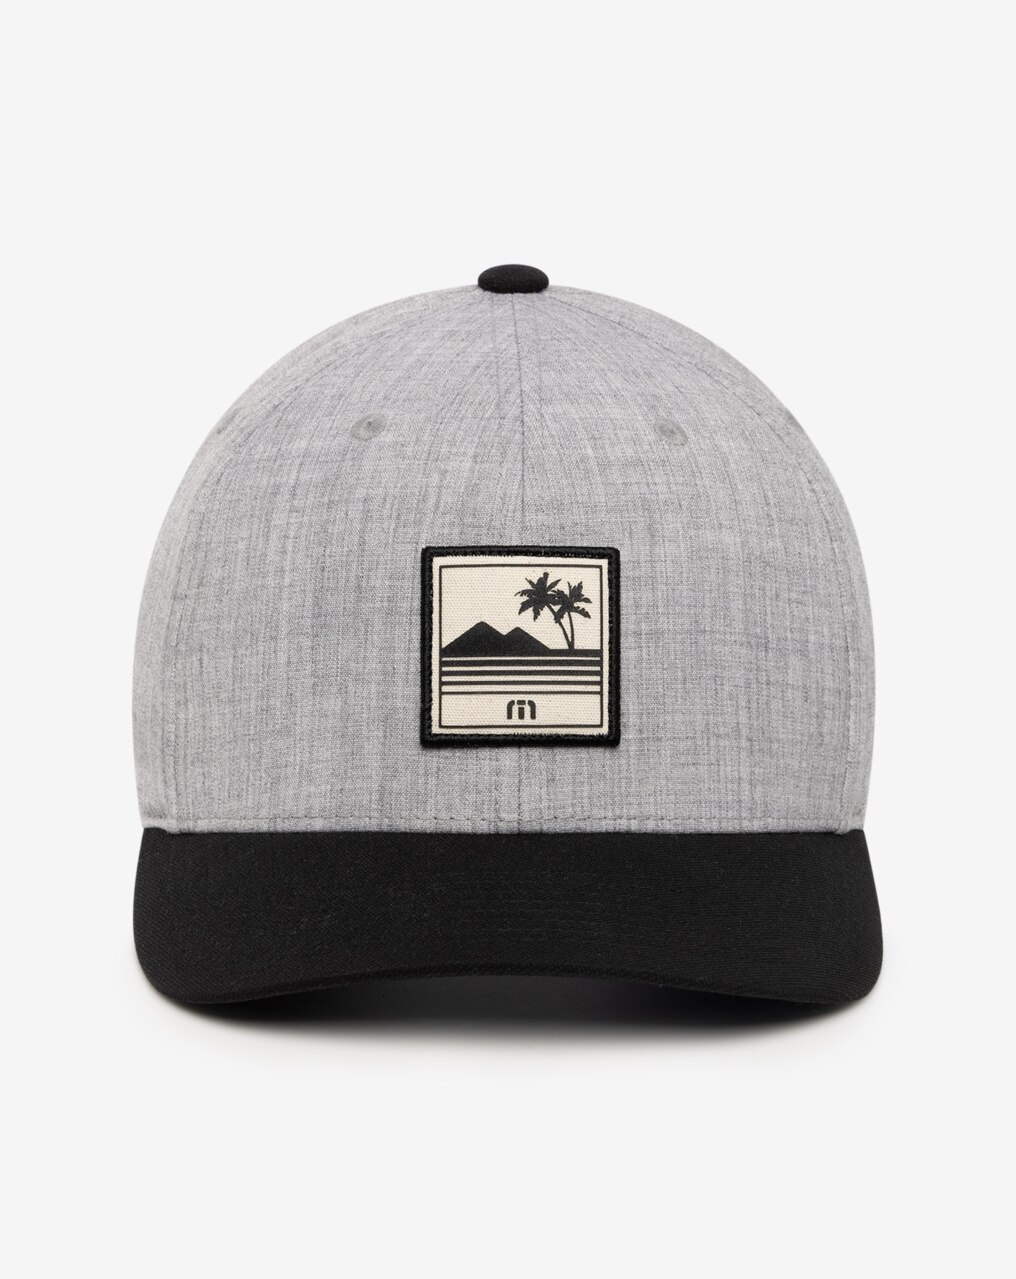 Trucker Hat - Explore The Great Outdoors Mountain & Trees Design - Snapback  Hats for Men (Black/Black Mesh) at  Men's Clothing store